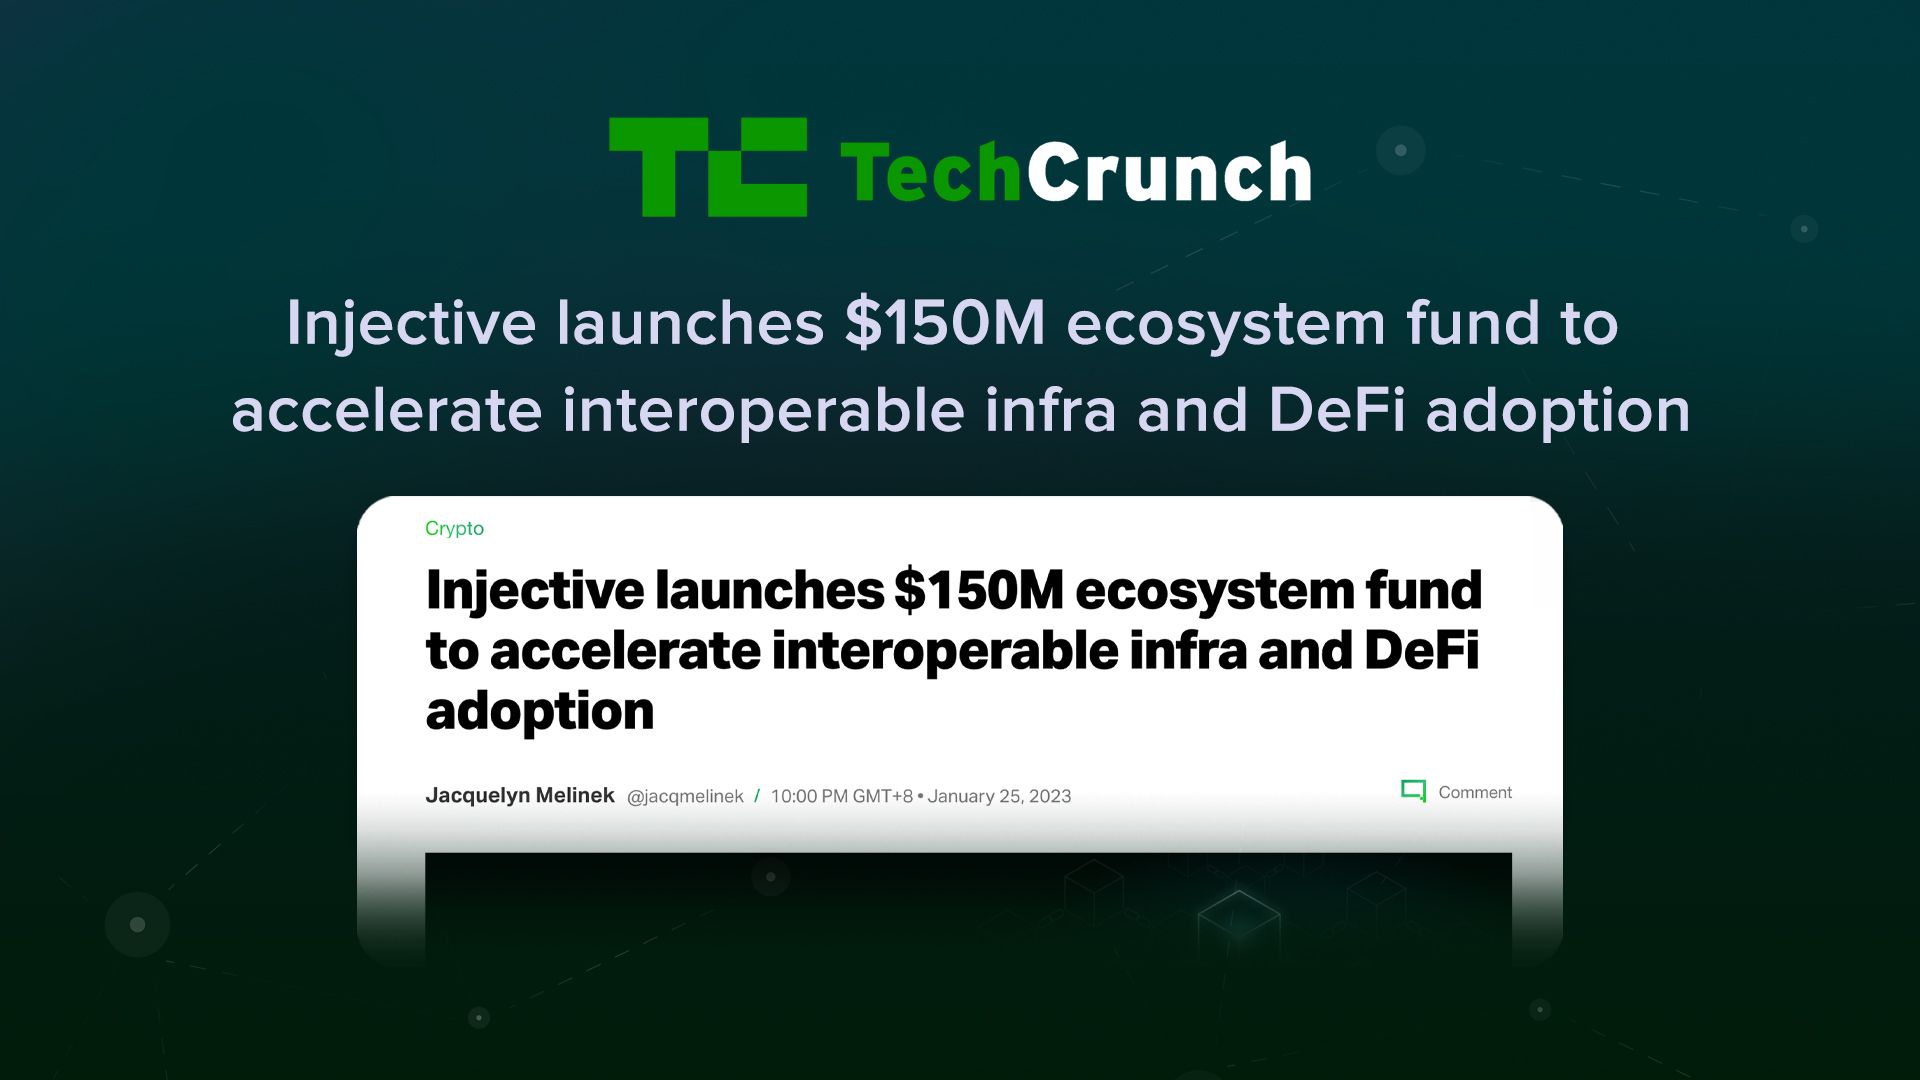 (TechCrunch) Injective launches $150M ecosystem fund to accelerate interoperable infra and DeFi adoption